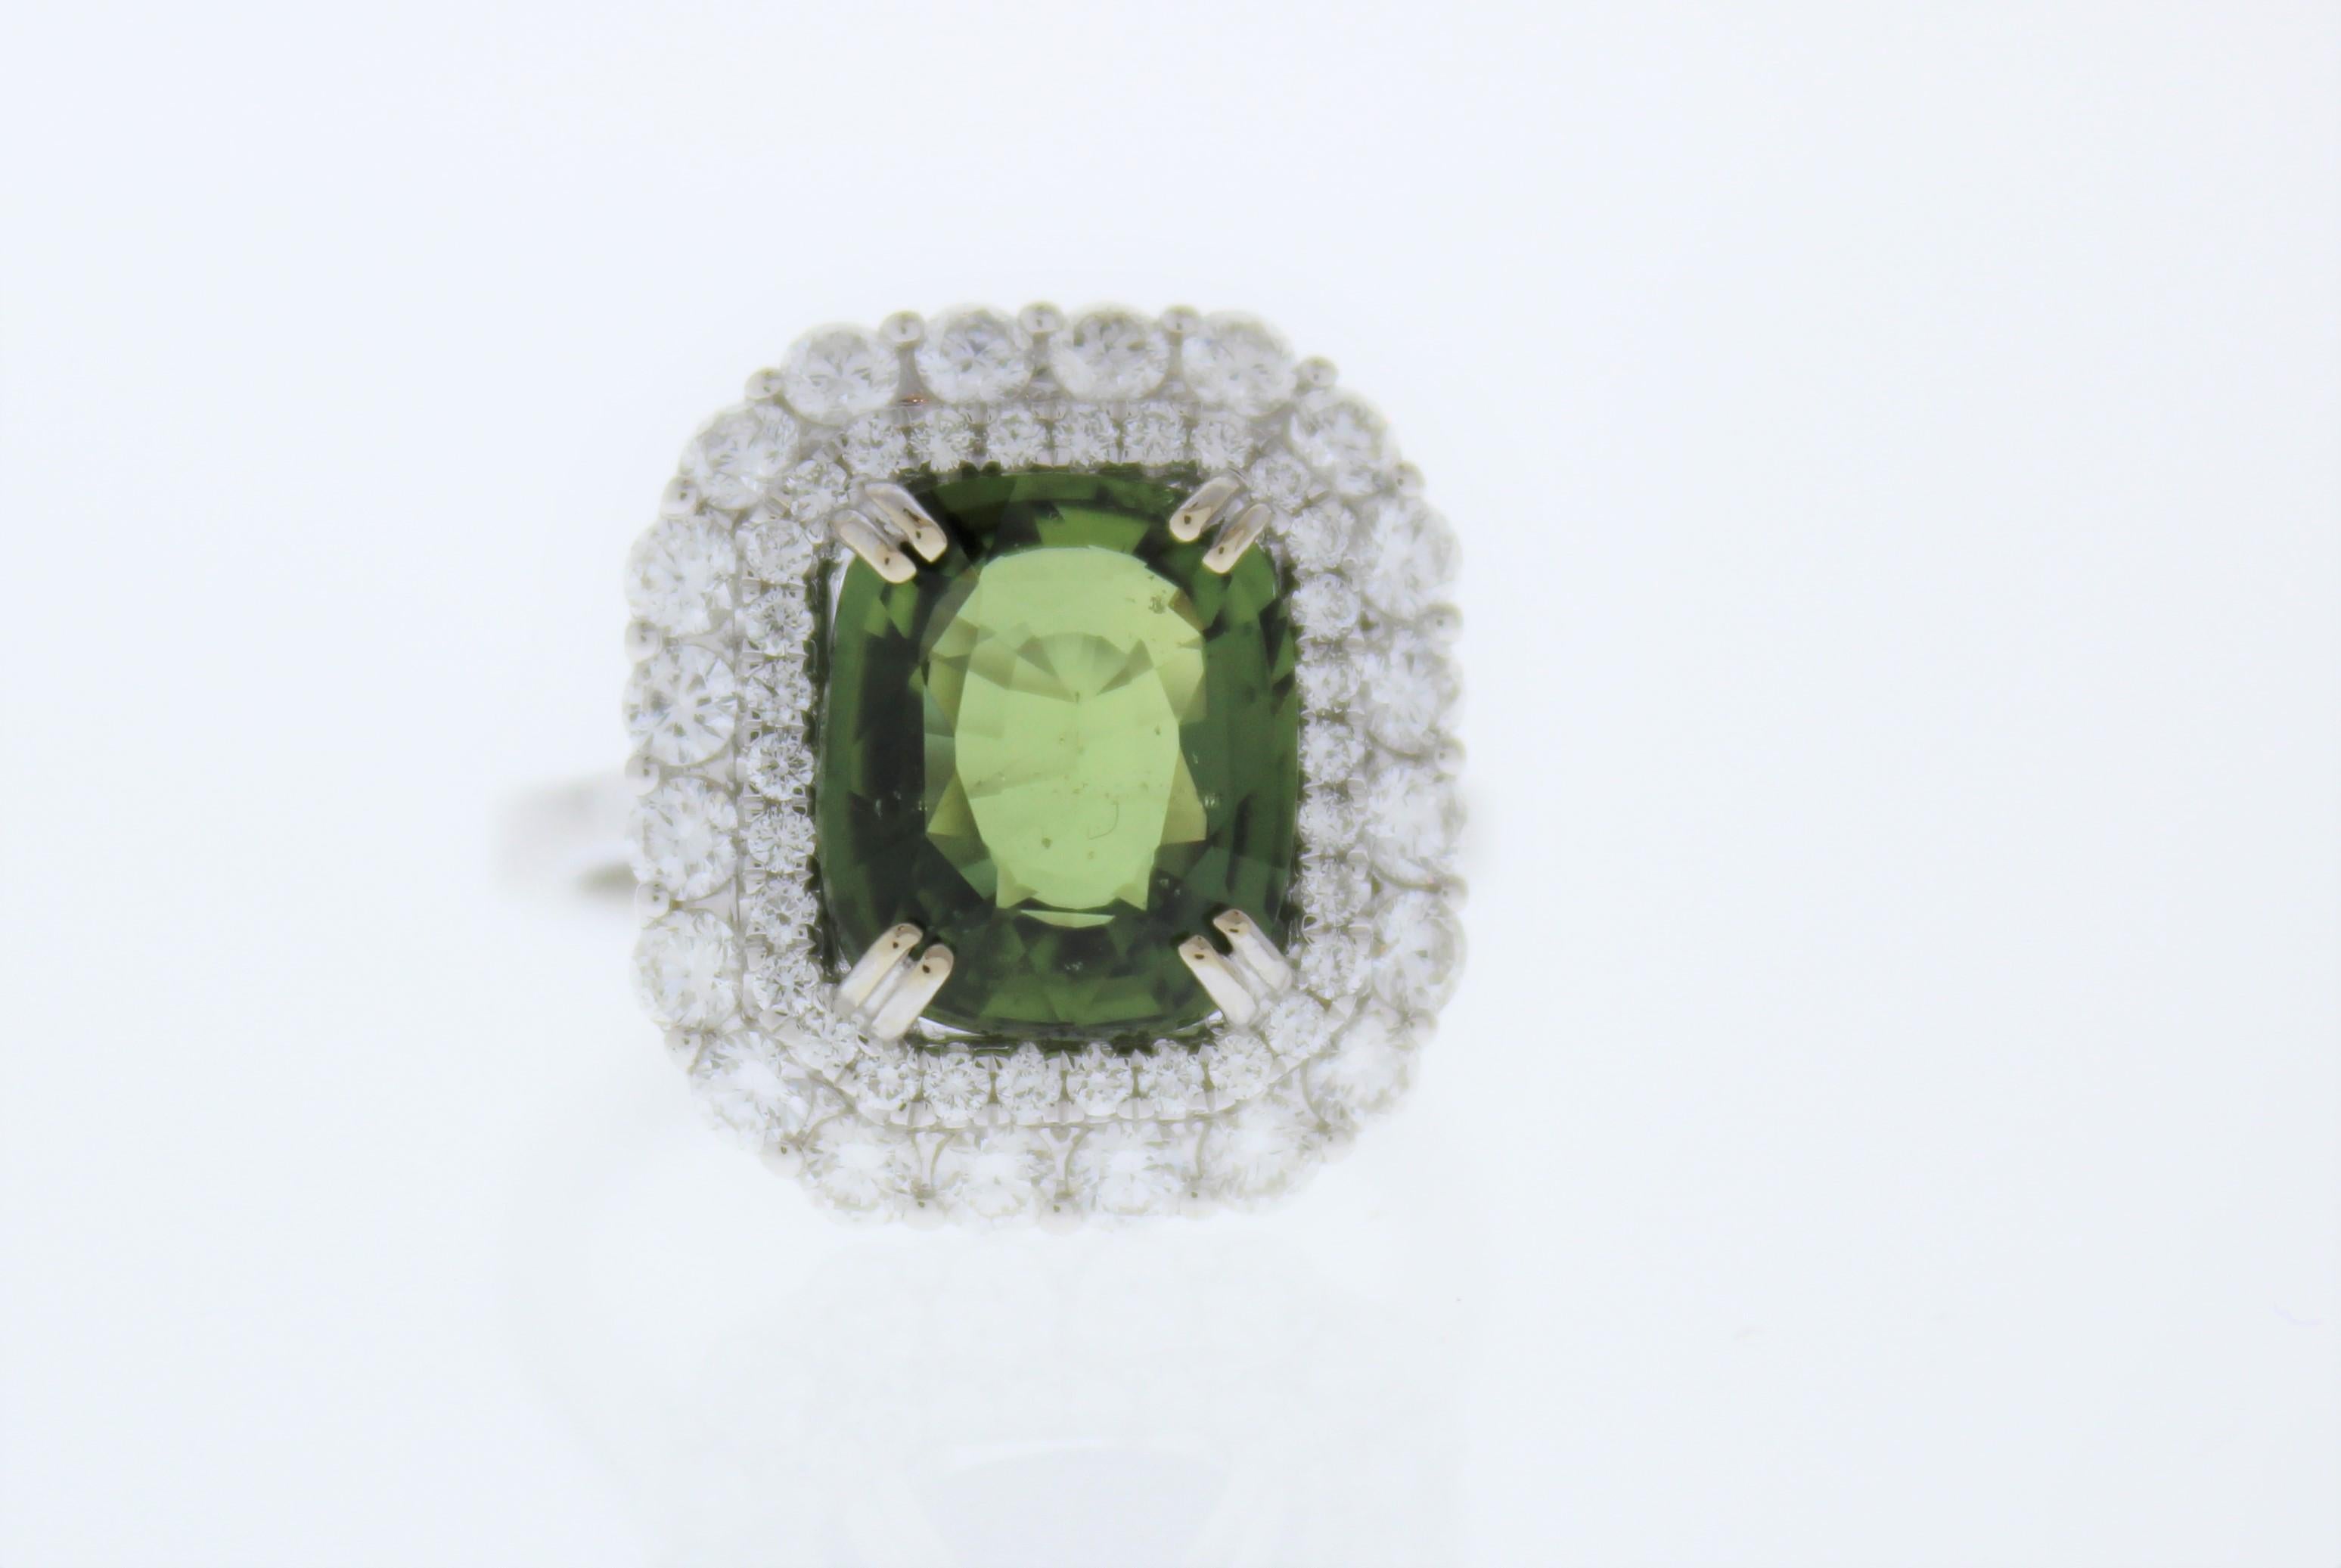 Cushion Cut 5.13 Carat Cushion Green Sapphire and Diamond Ring in 18K White Gold For Sale